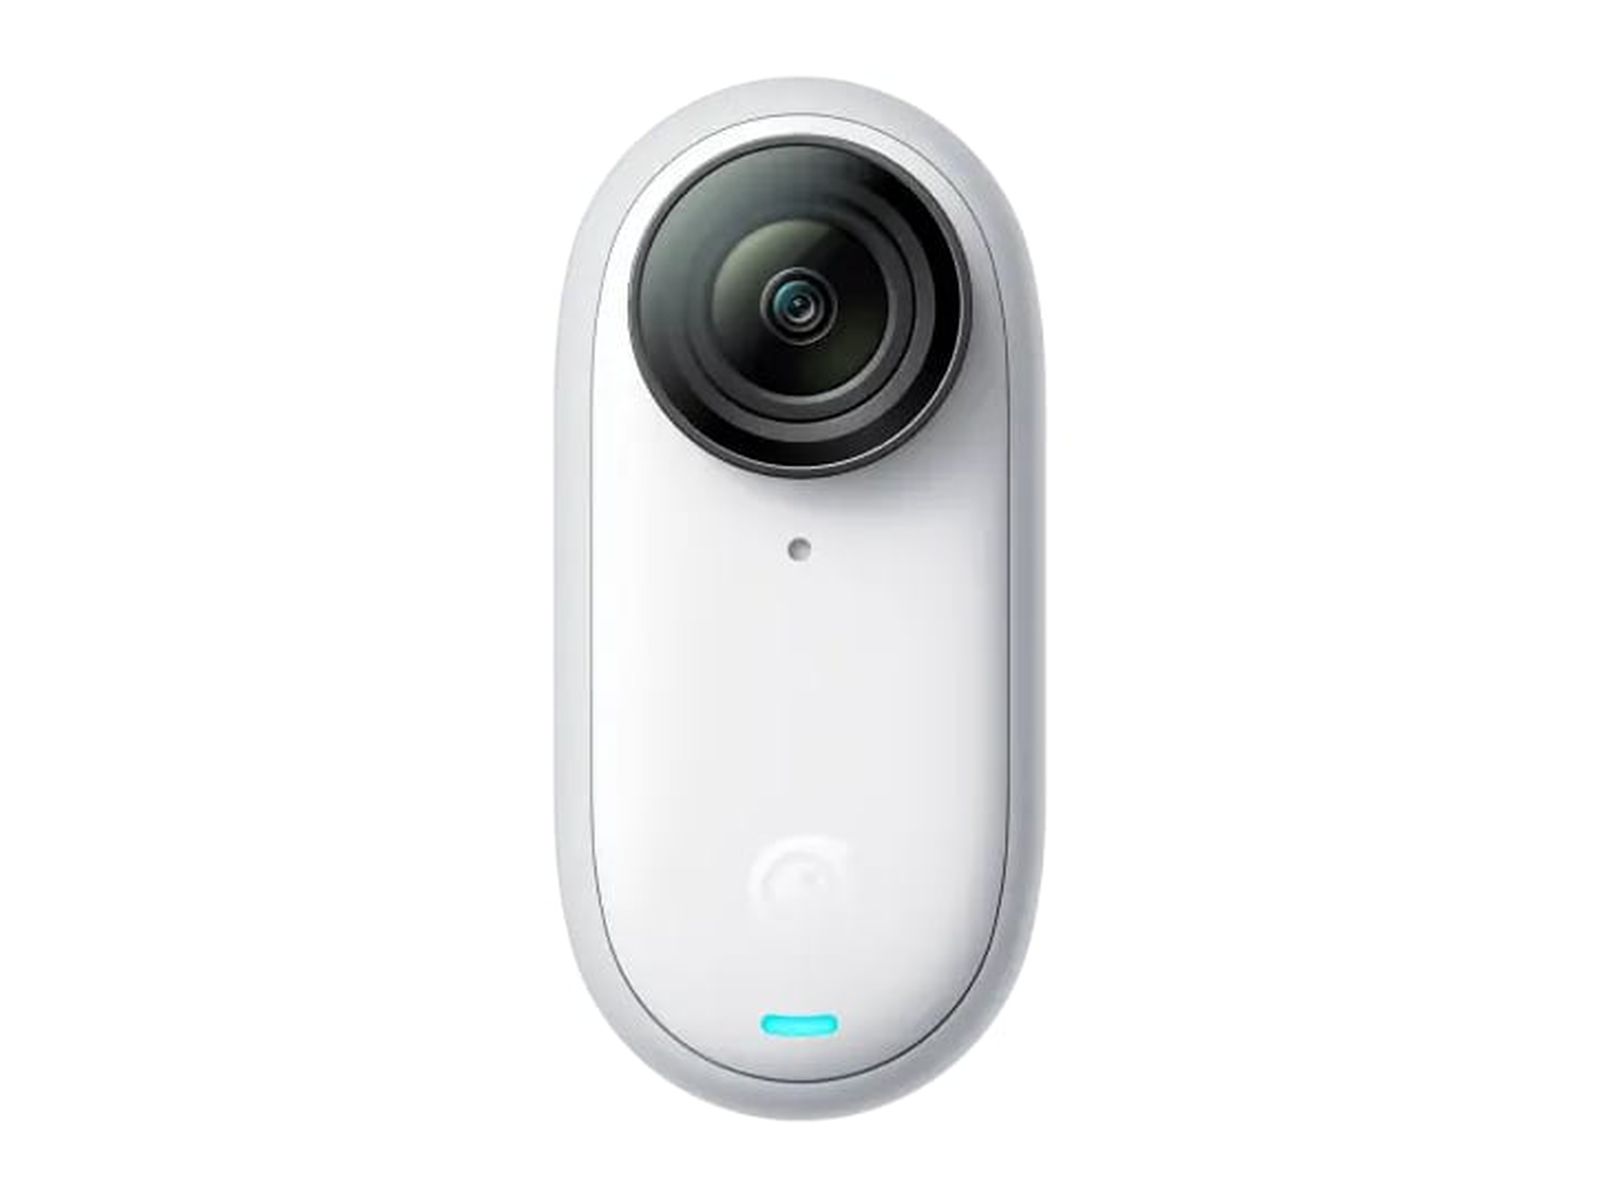 Introducing Insta360 GO 3 - The Tiny Mighty Action Cam 